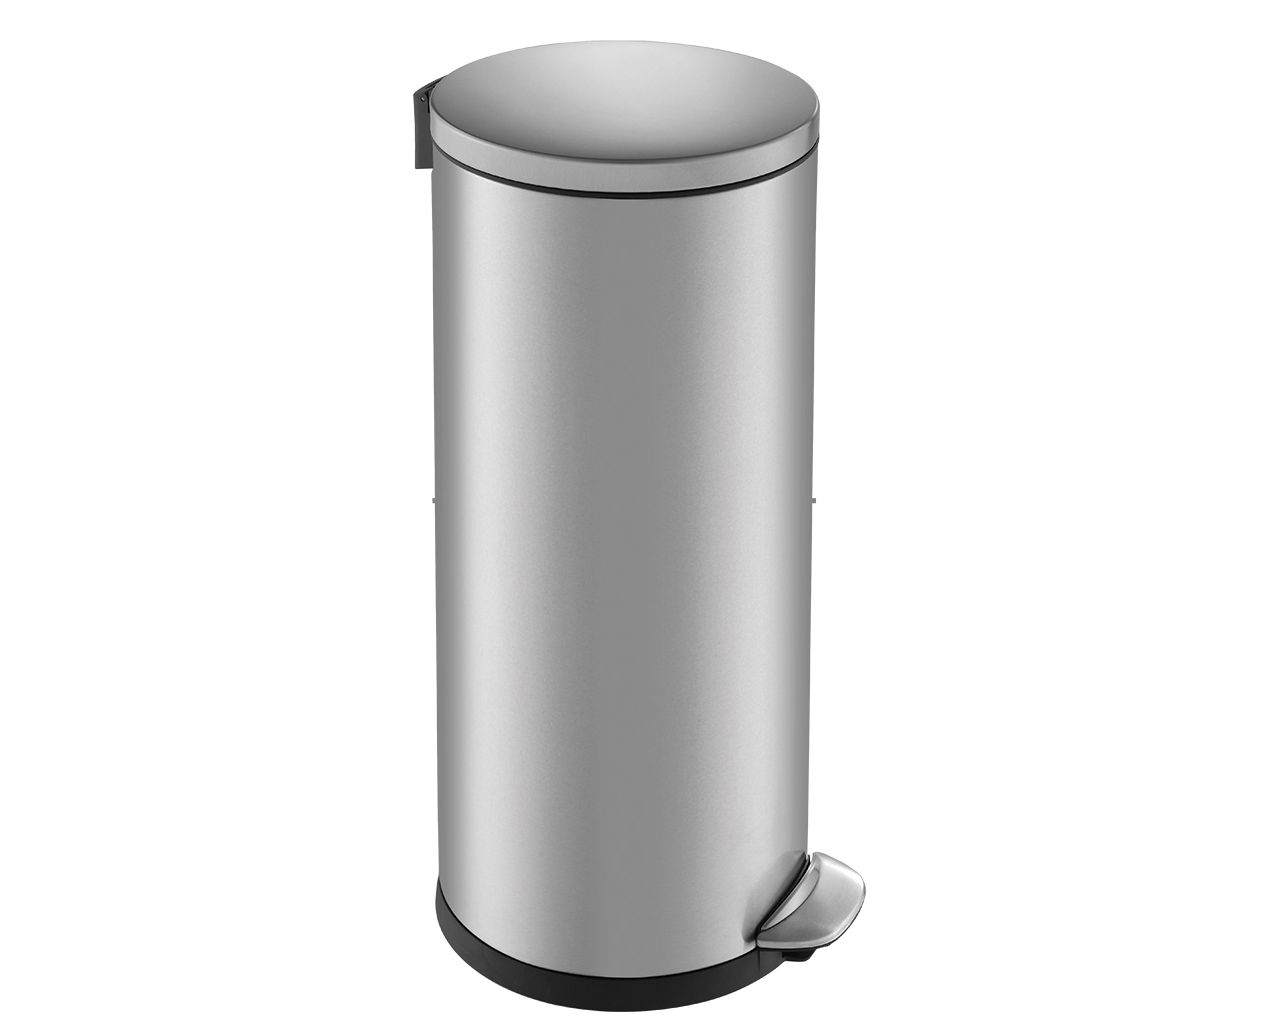 TOP SILENT LUNA - round pedal bin made of stainless steel, capacity 30 l (white)